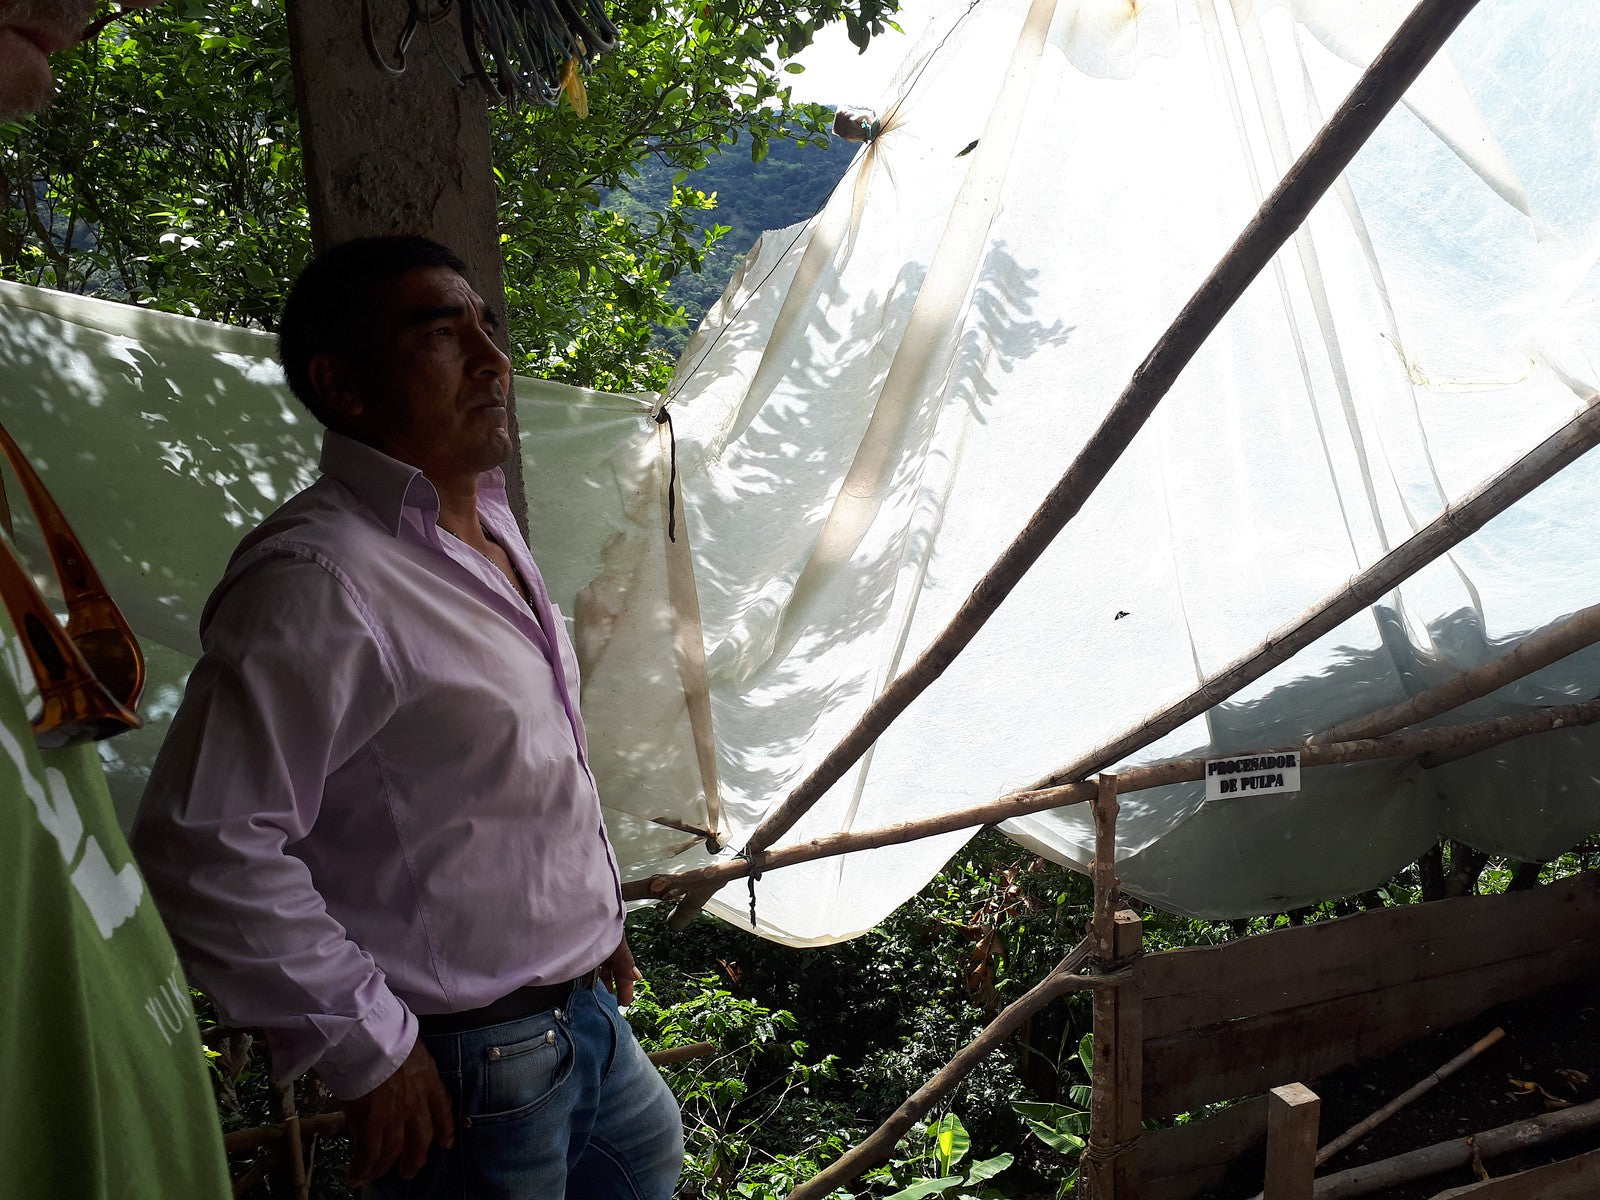 A coffee farmer from Colombia COSURCA cooperative leaning against a post with tarps nearby.